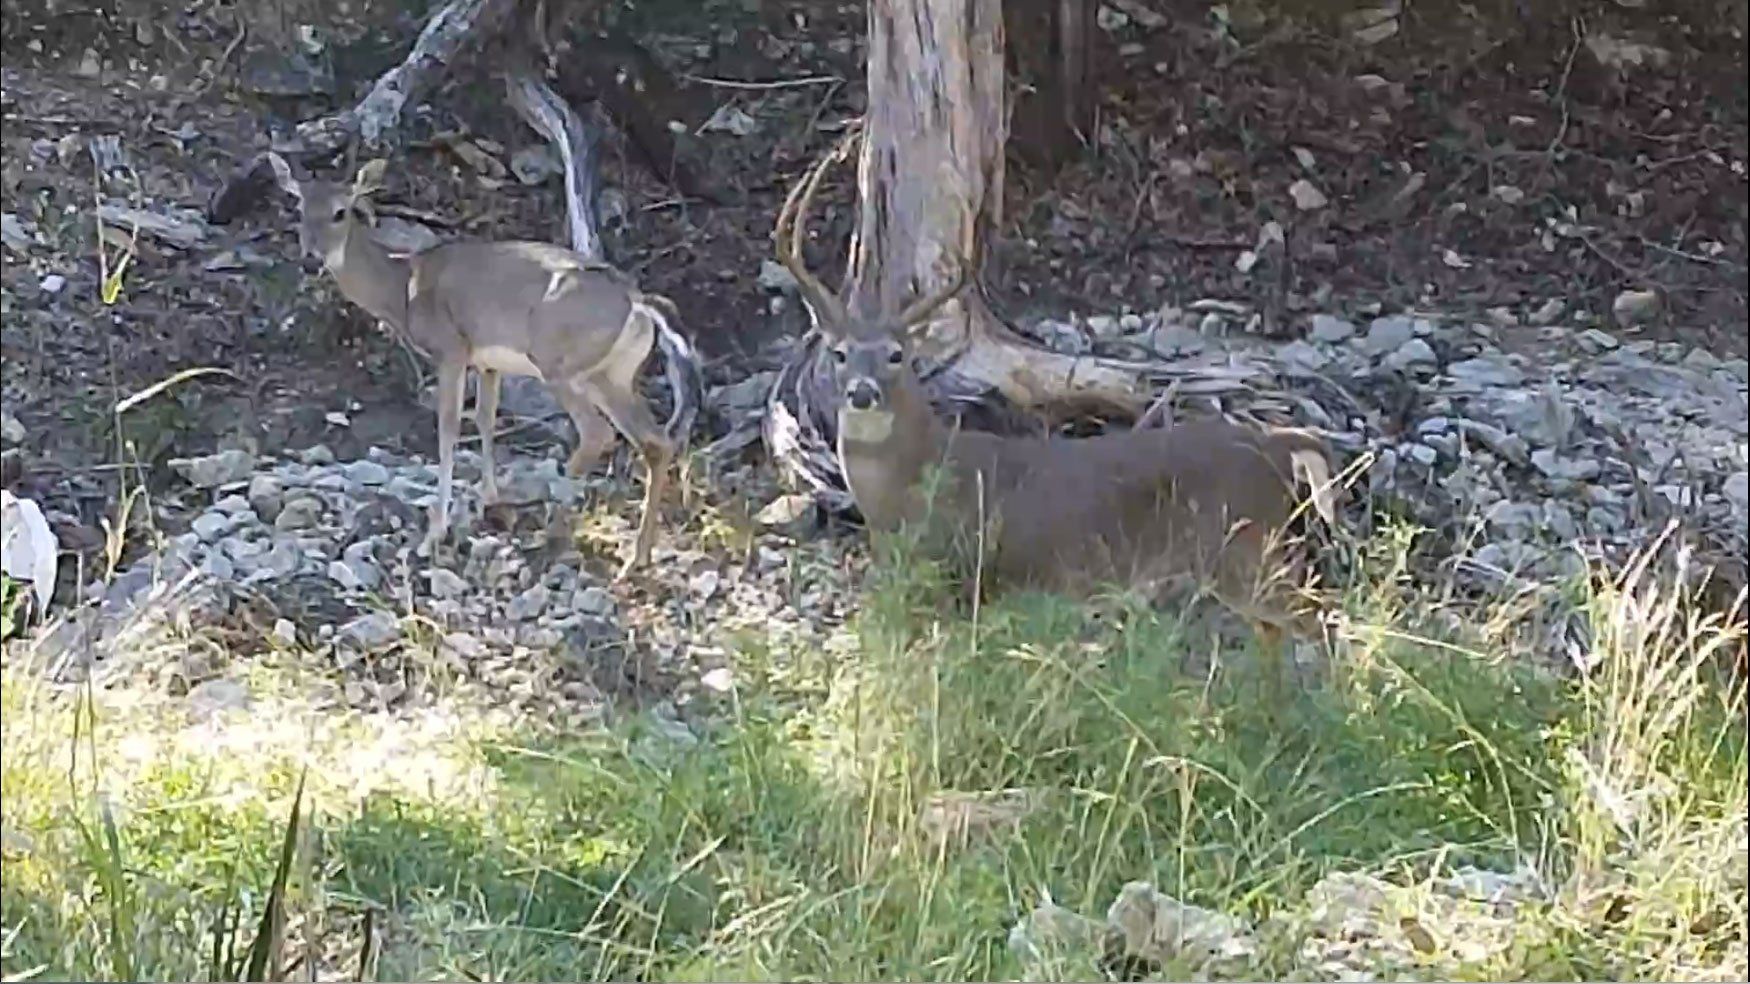 Wildlife (wild deer) abounds at Oak Meadows RV Park in Canyon Lake, Texas!